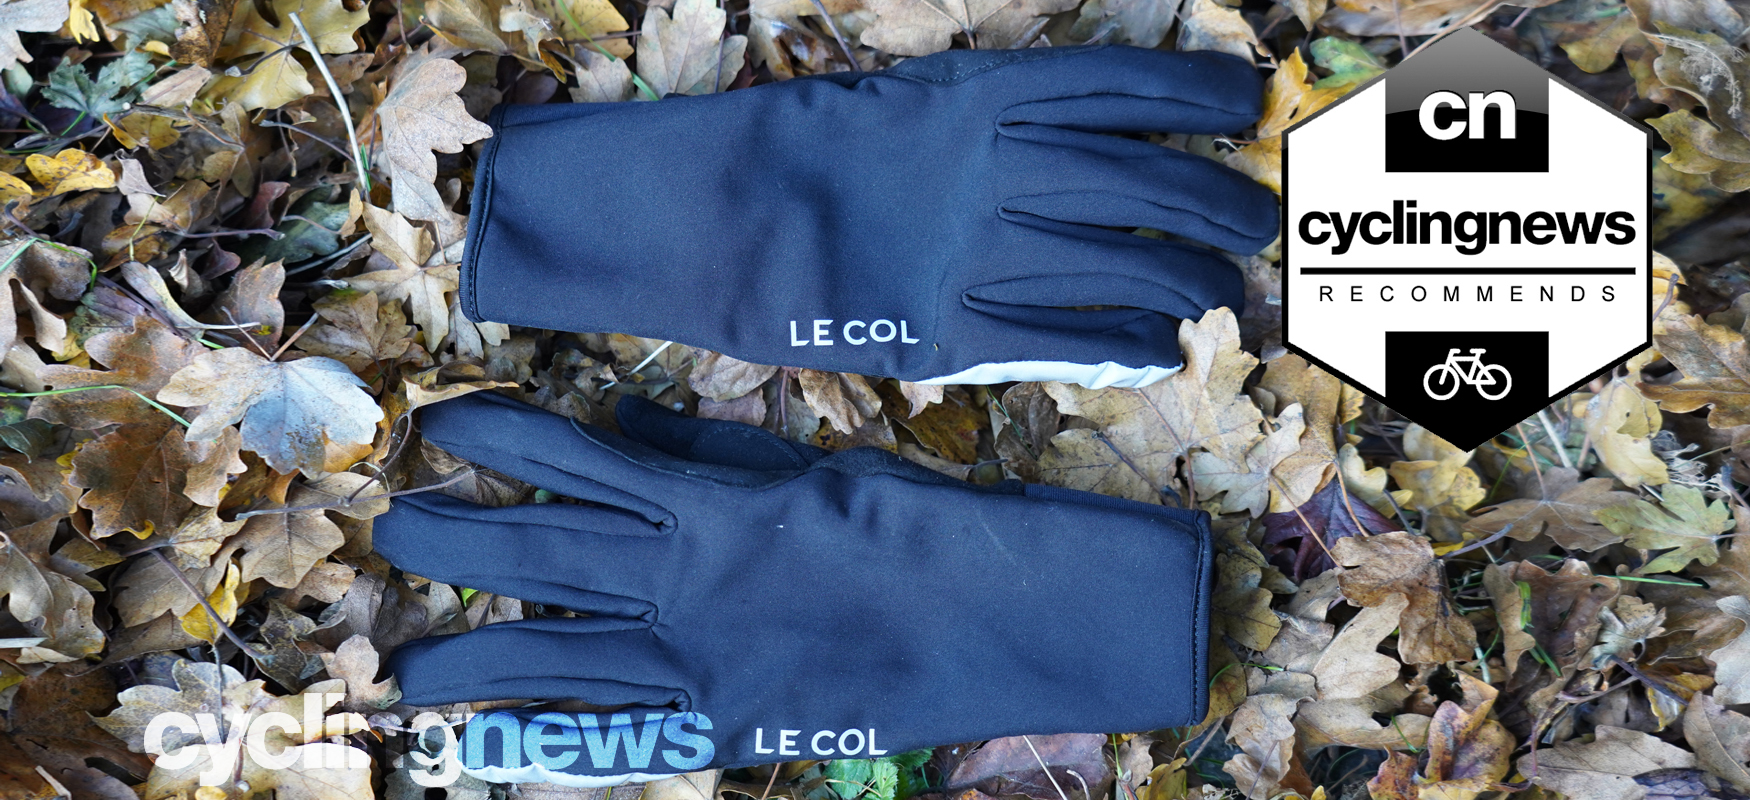 Le Col Hors Categorie Deep Winter gloves review | Cyclingnews